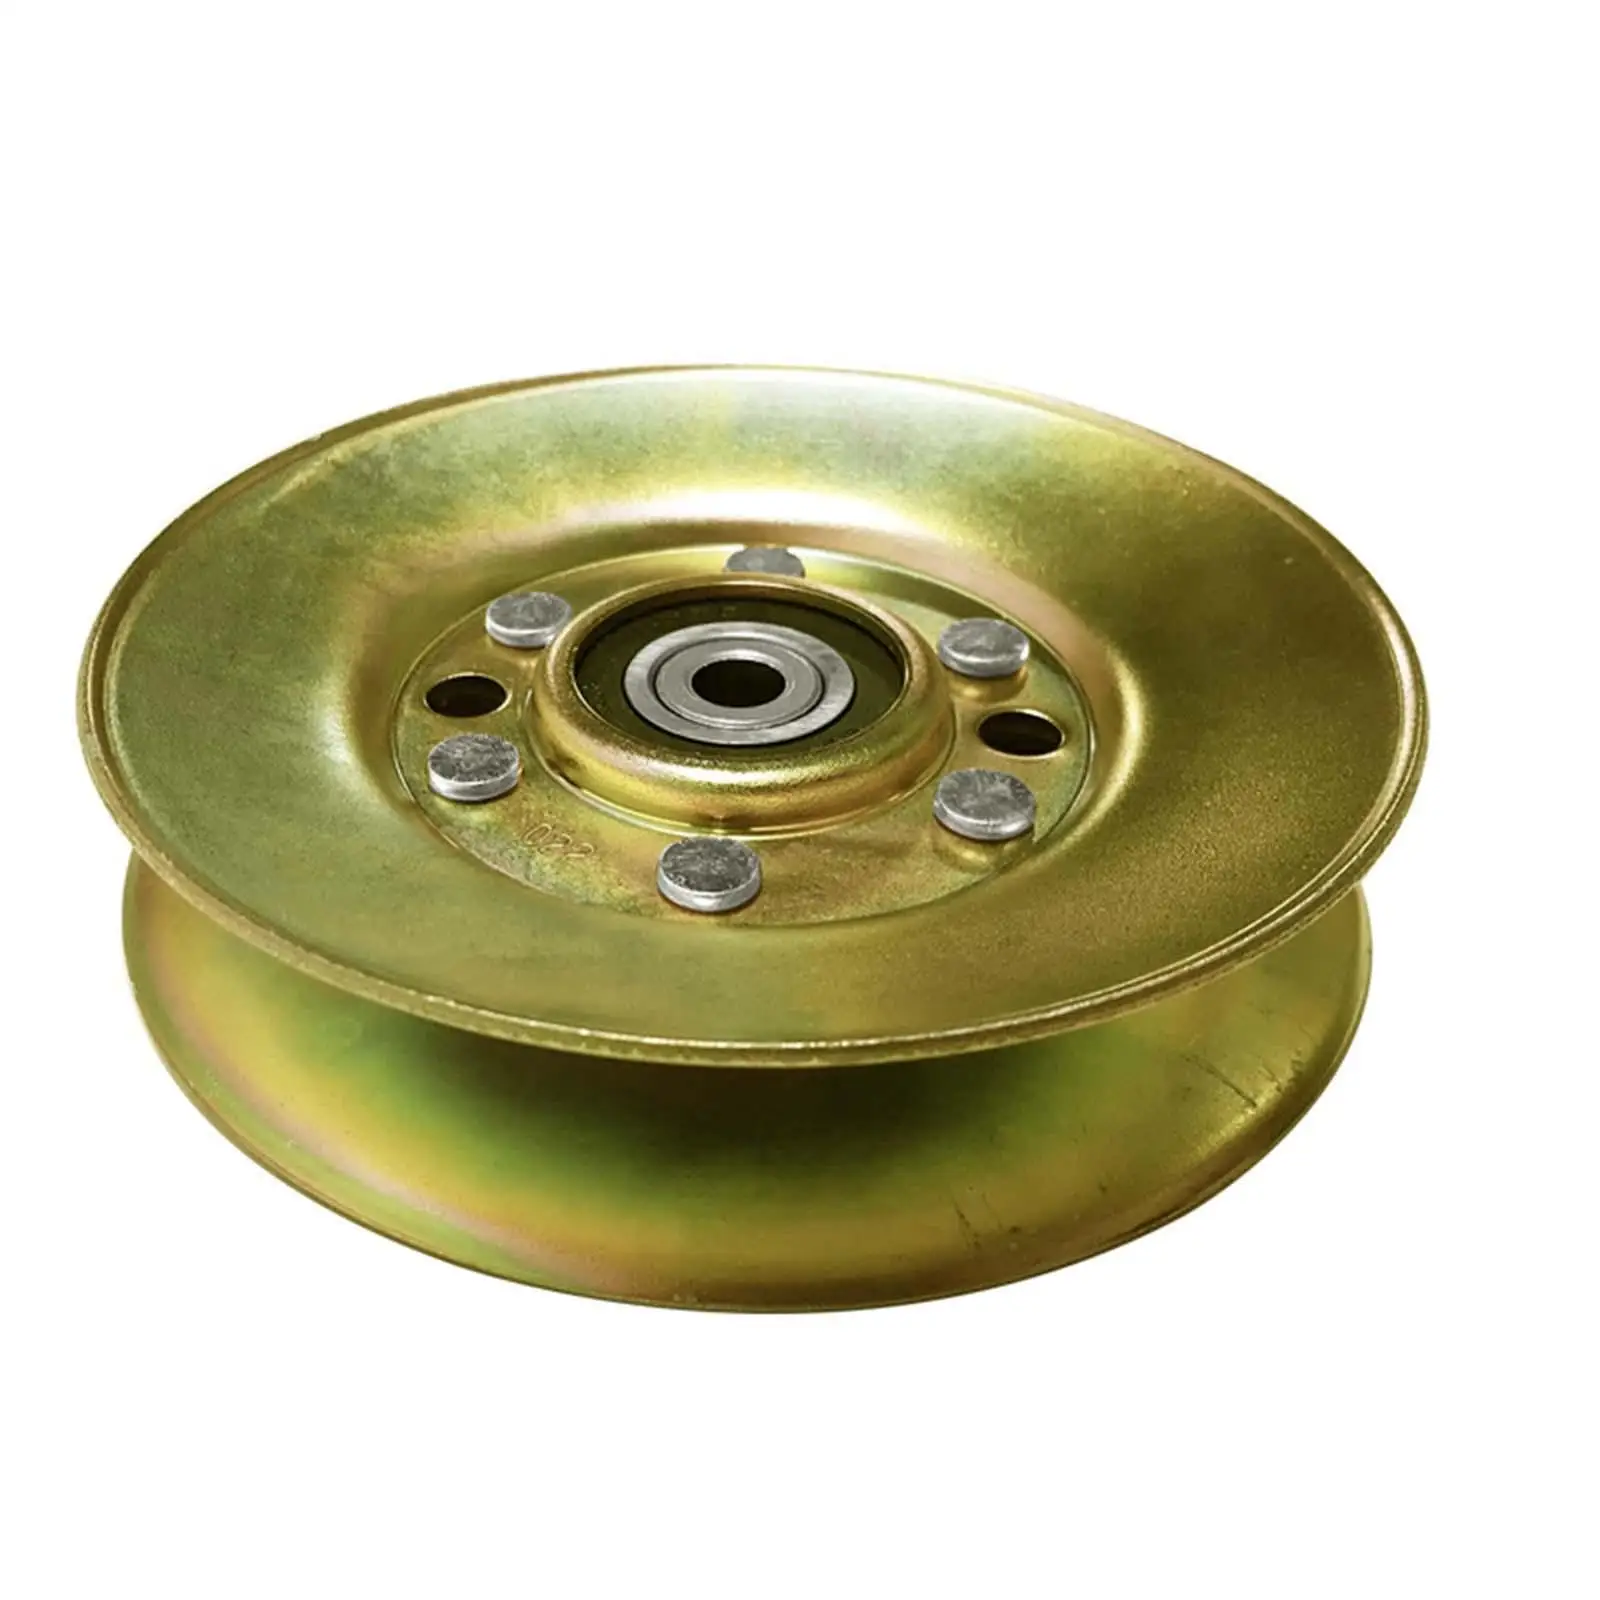 Idler Pulley Replaces Attachment Pulley for MTD 02005079 Accs